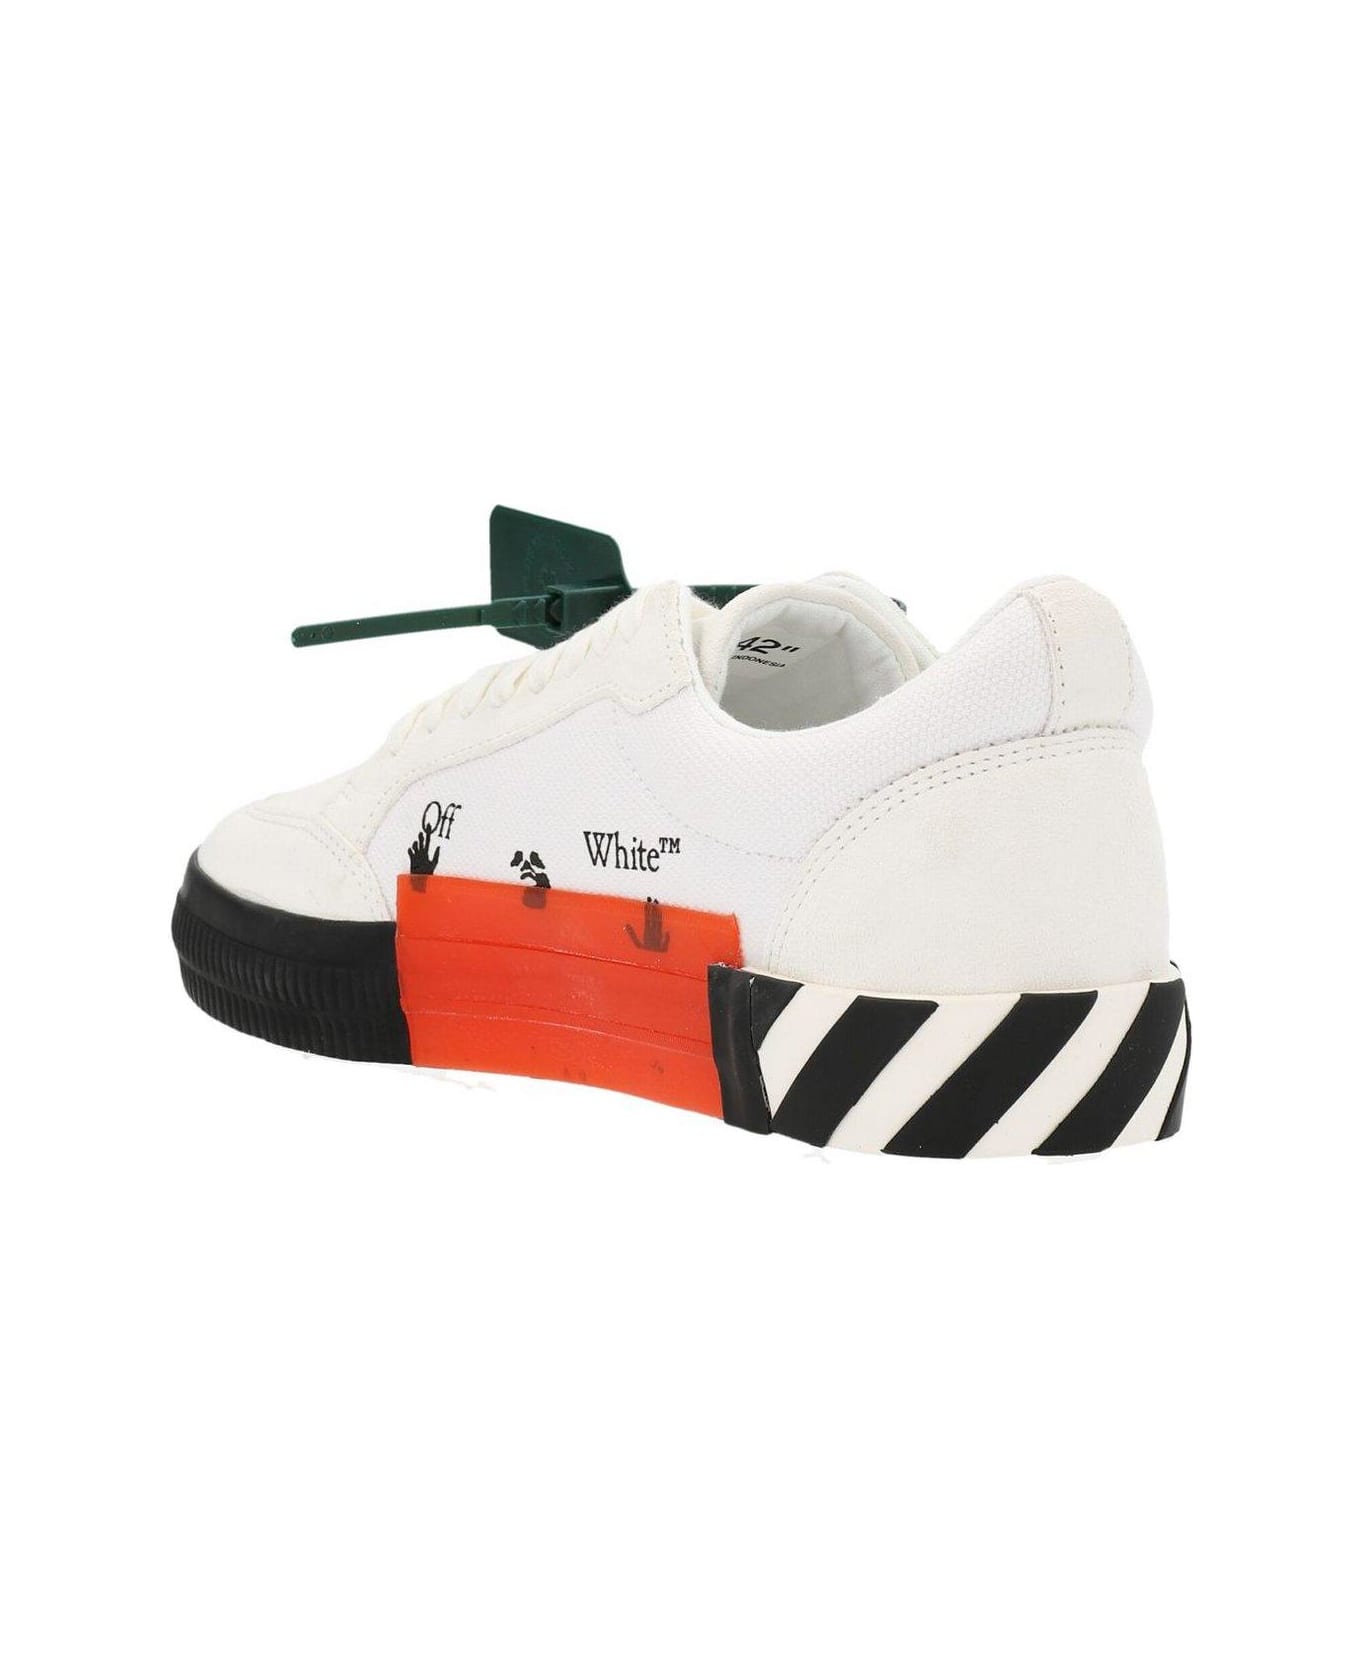 Off-White Vulcanized Lace-up Sneakers - White/navy